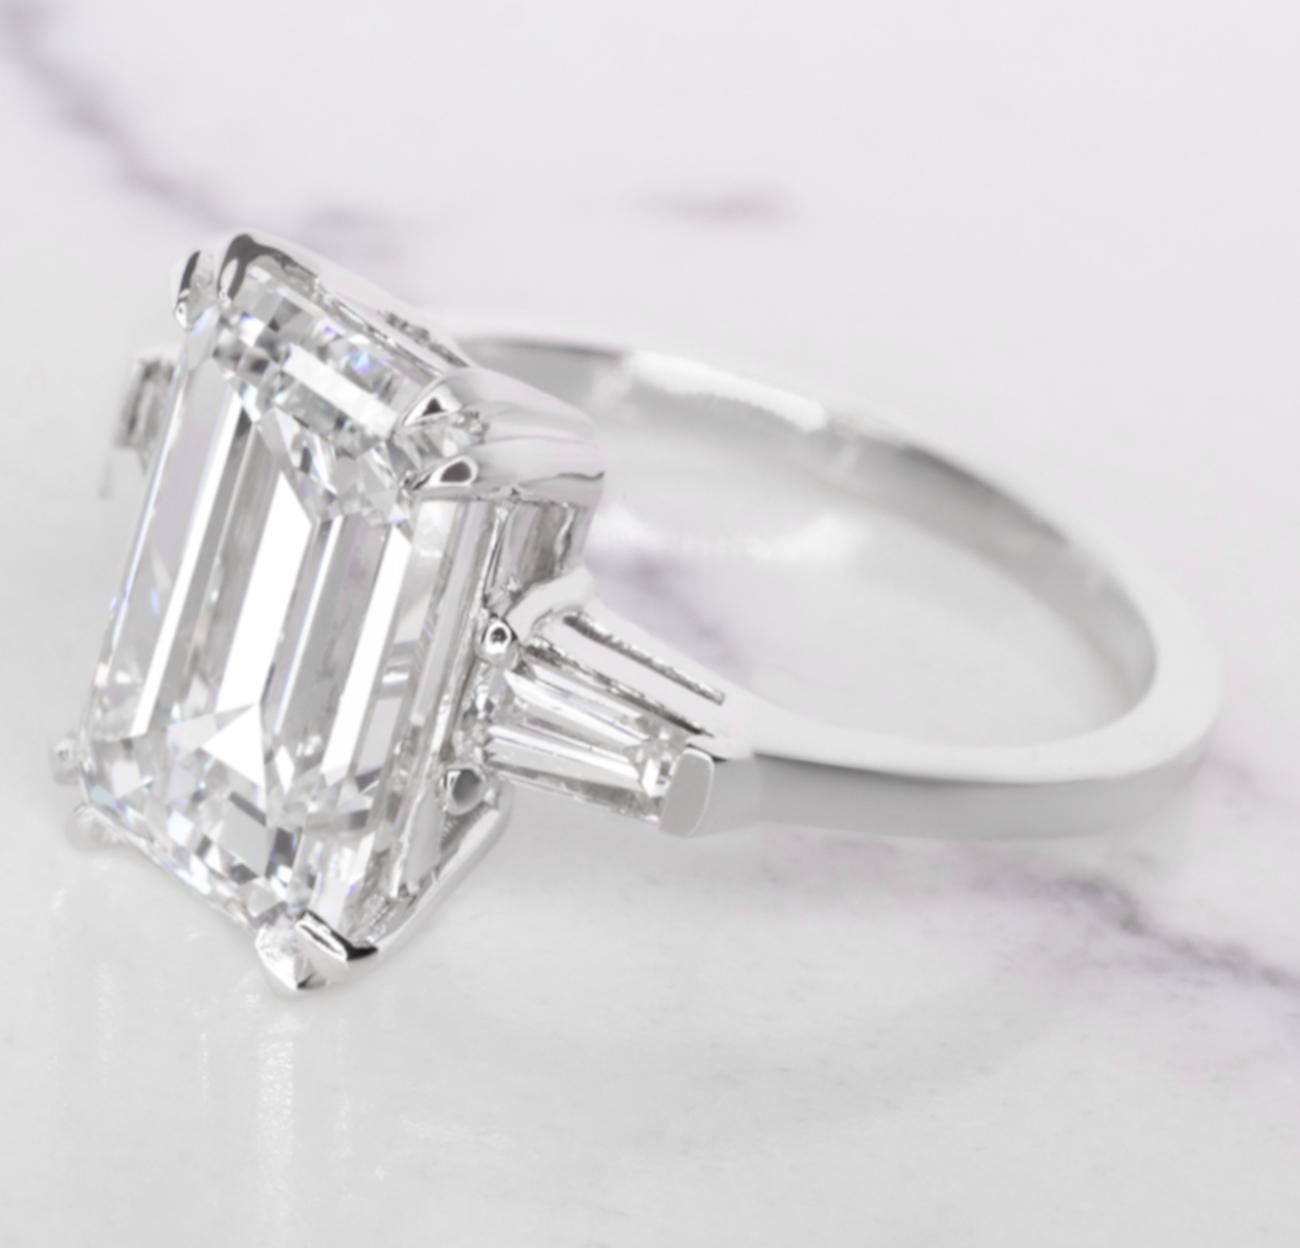 Contemporary GIA Certified 4 Carat Emerald Cut Diamond Ideal Proportions For Sale